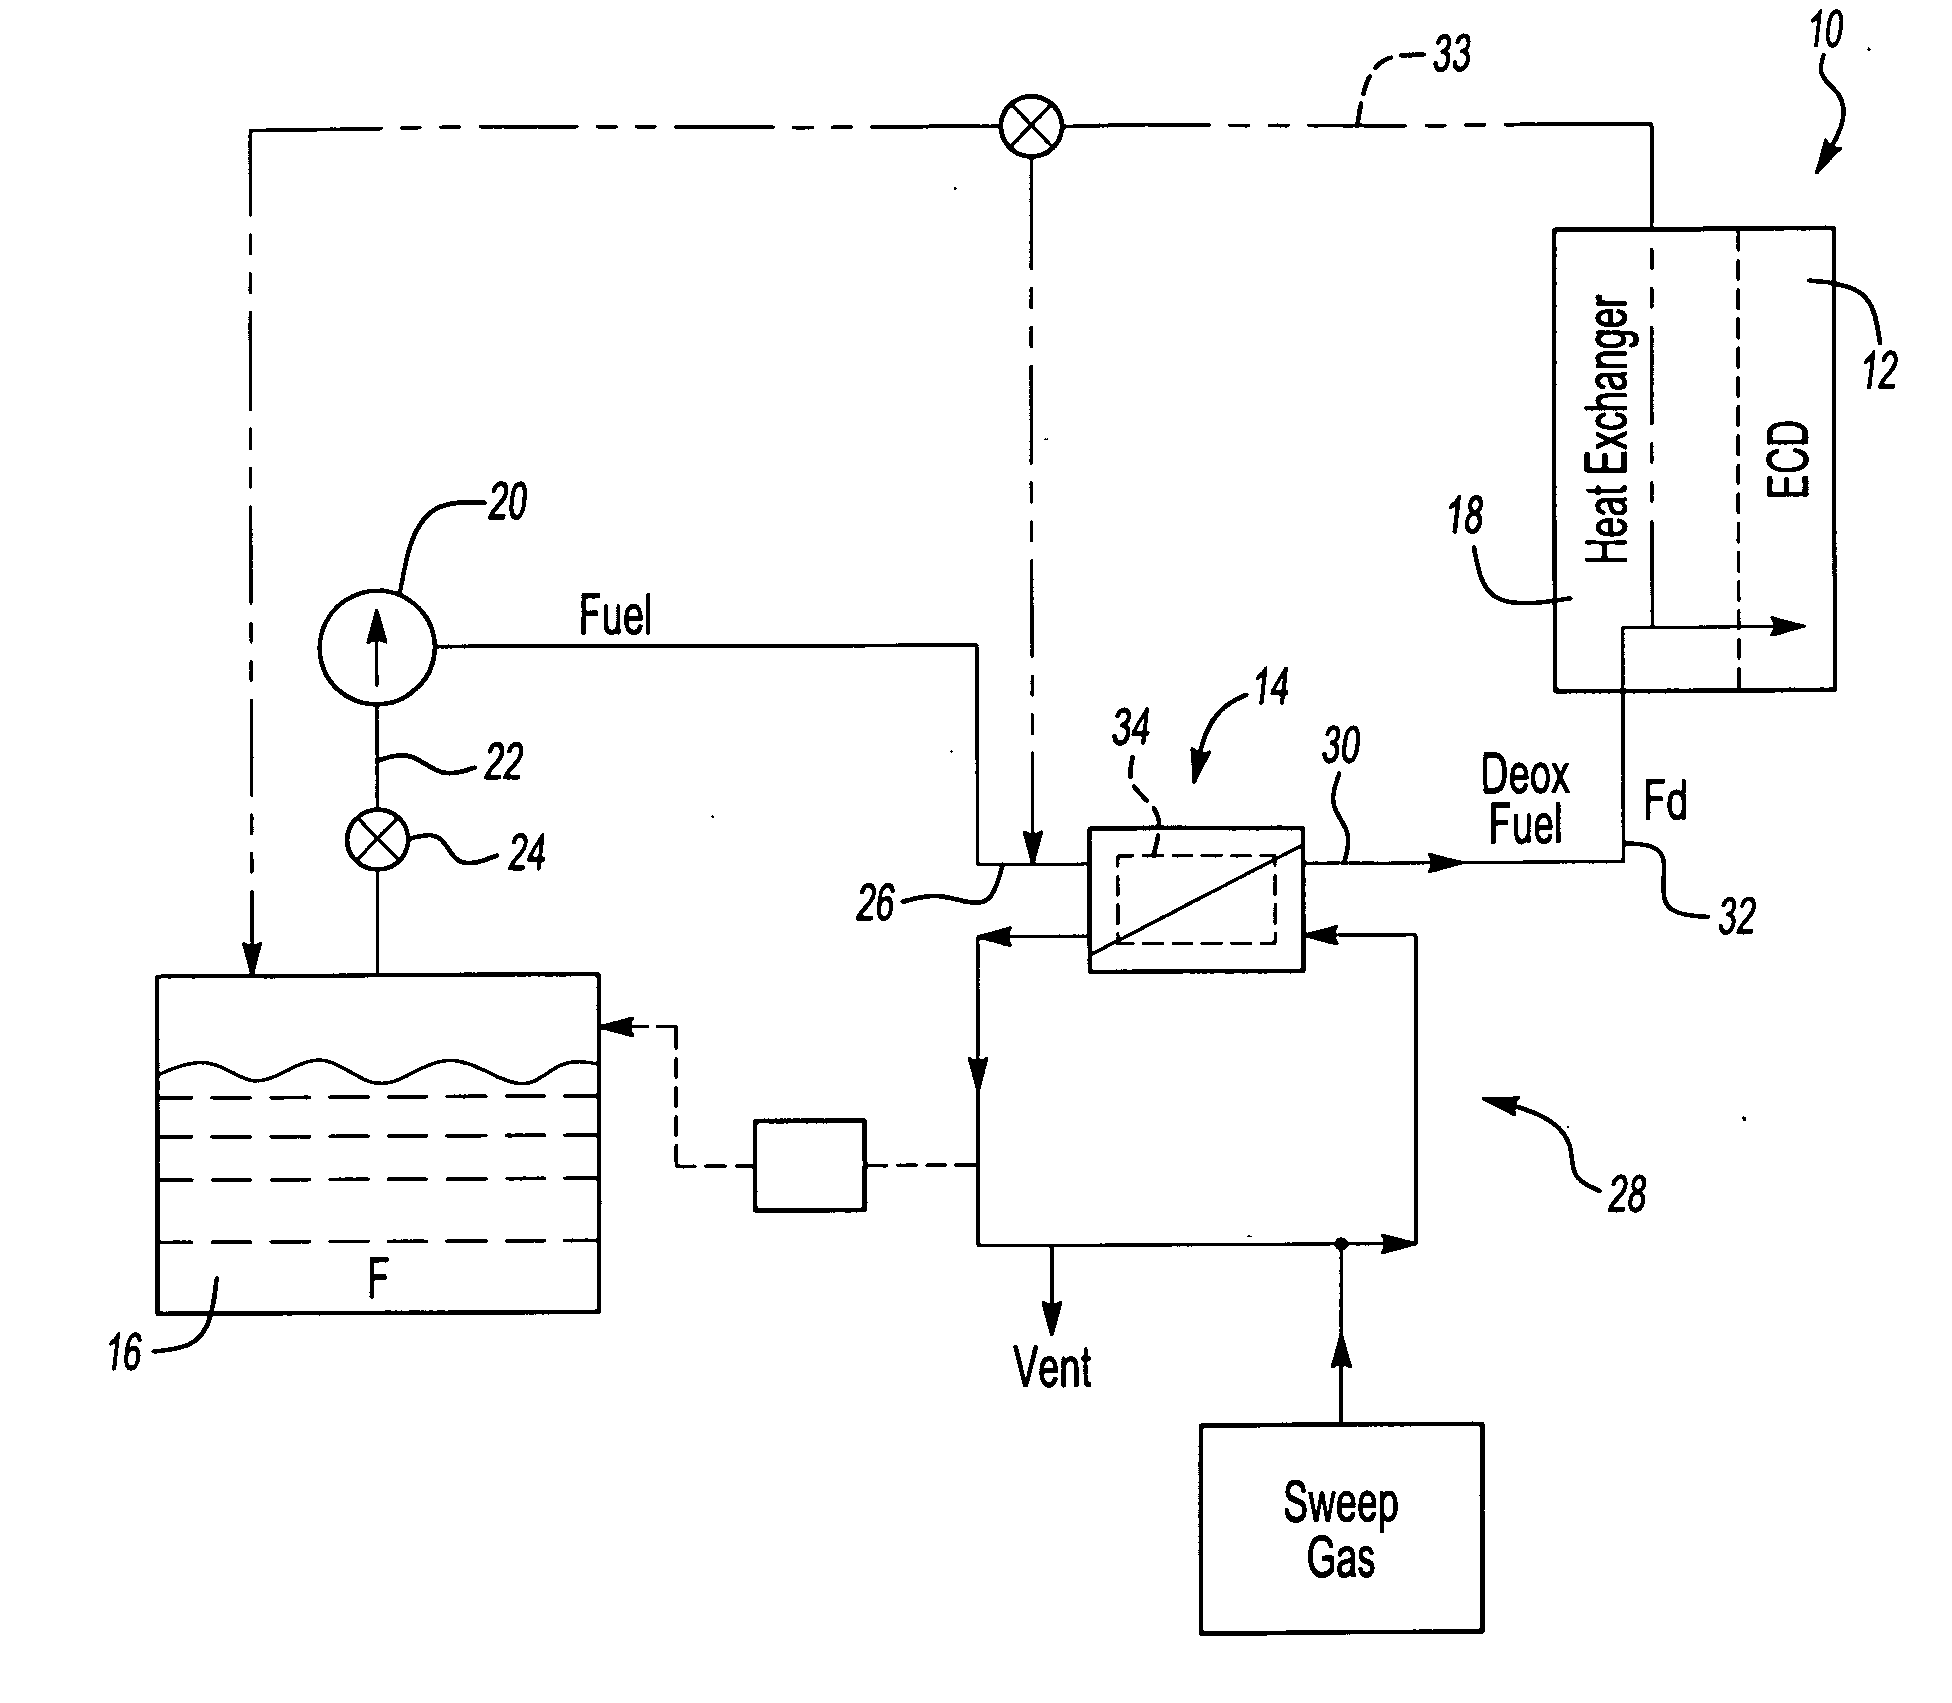 Fuel deoxygenation system with textured oxygen permeable membrane